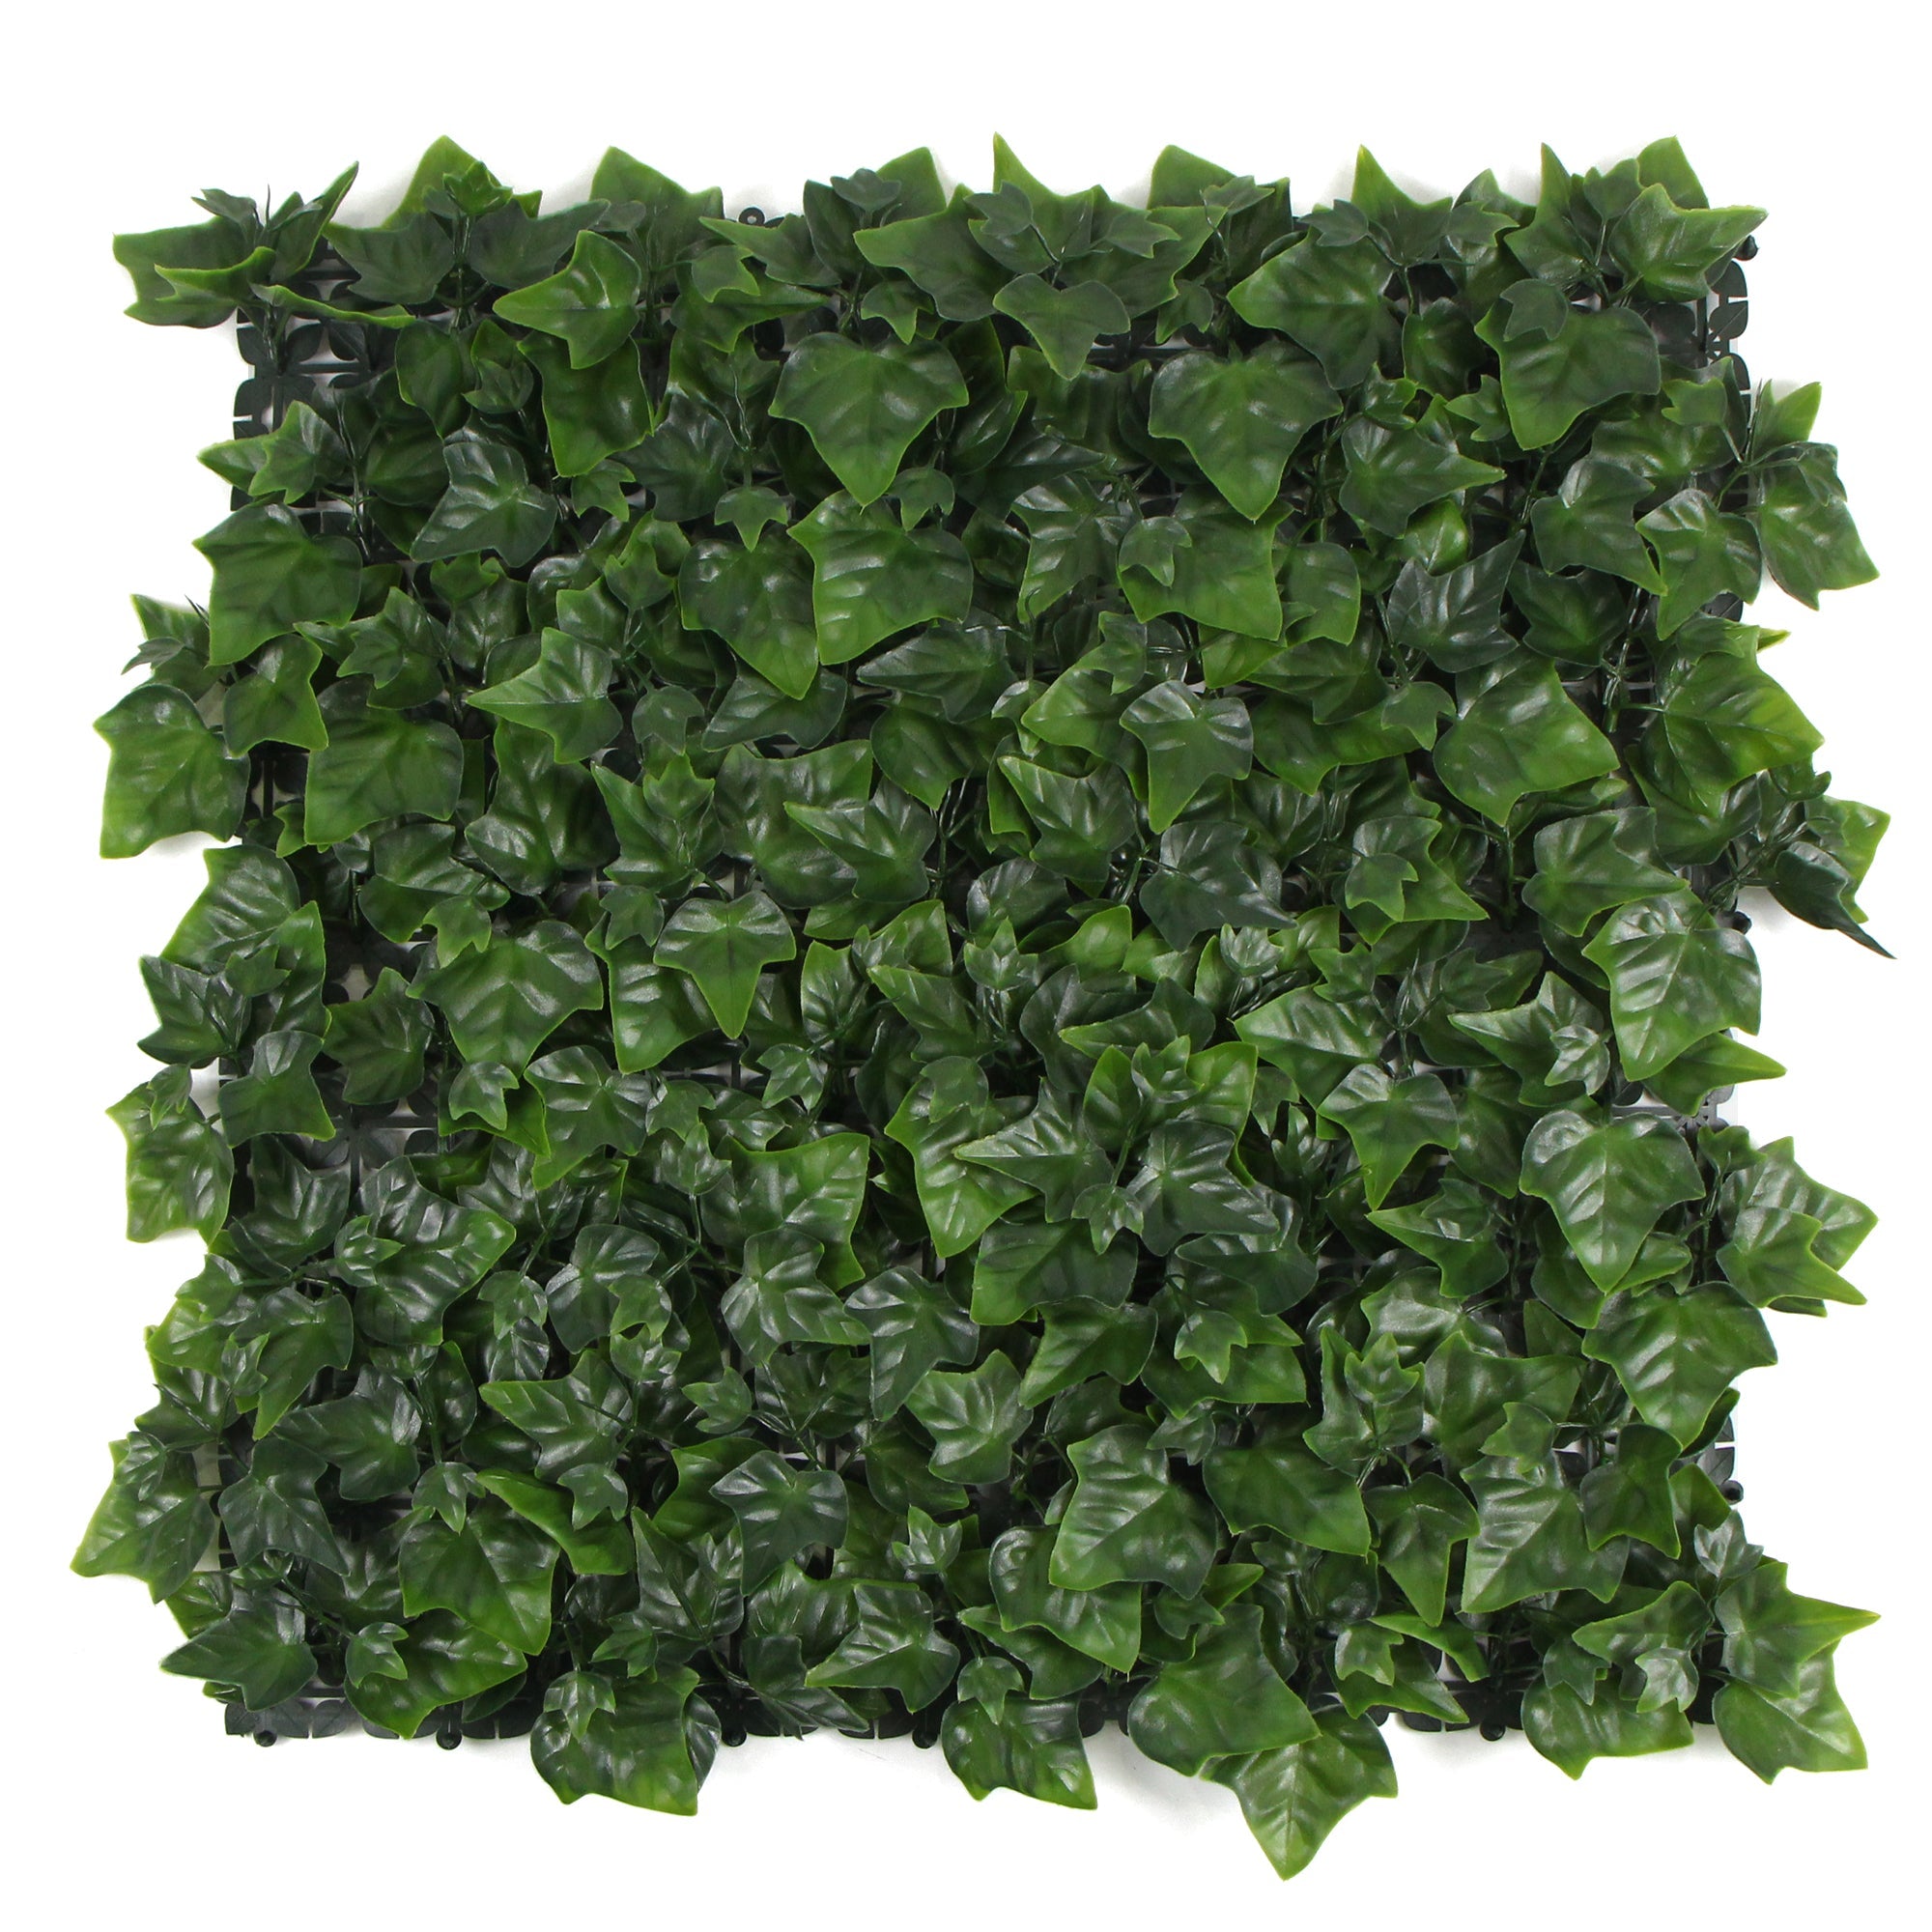 variegated-boston-ivy-leaf-screen-green-wall-panel-uv-resistant-1m-x-1m-solid-backing-651394.jpg